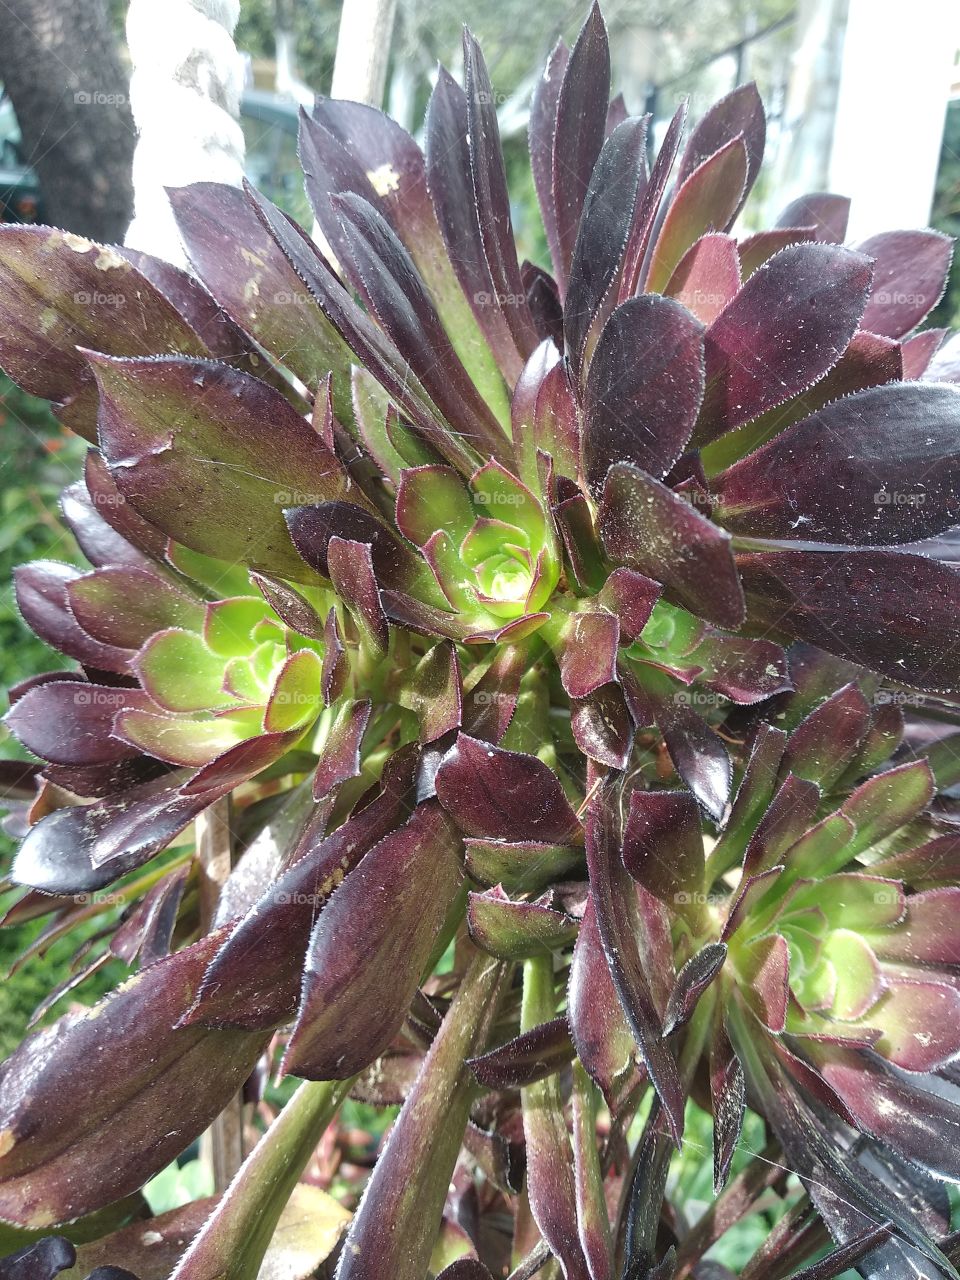 well this one of the strangest flowers in my garden i like it beacause its very different looks like its out of this world being dark colour and looks like the light is coming from within!